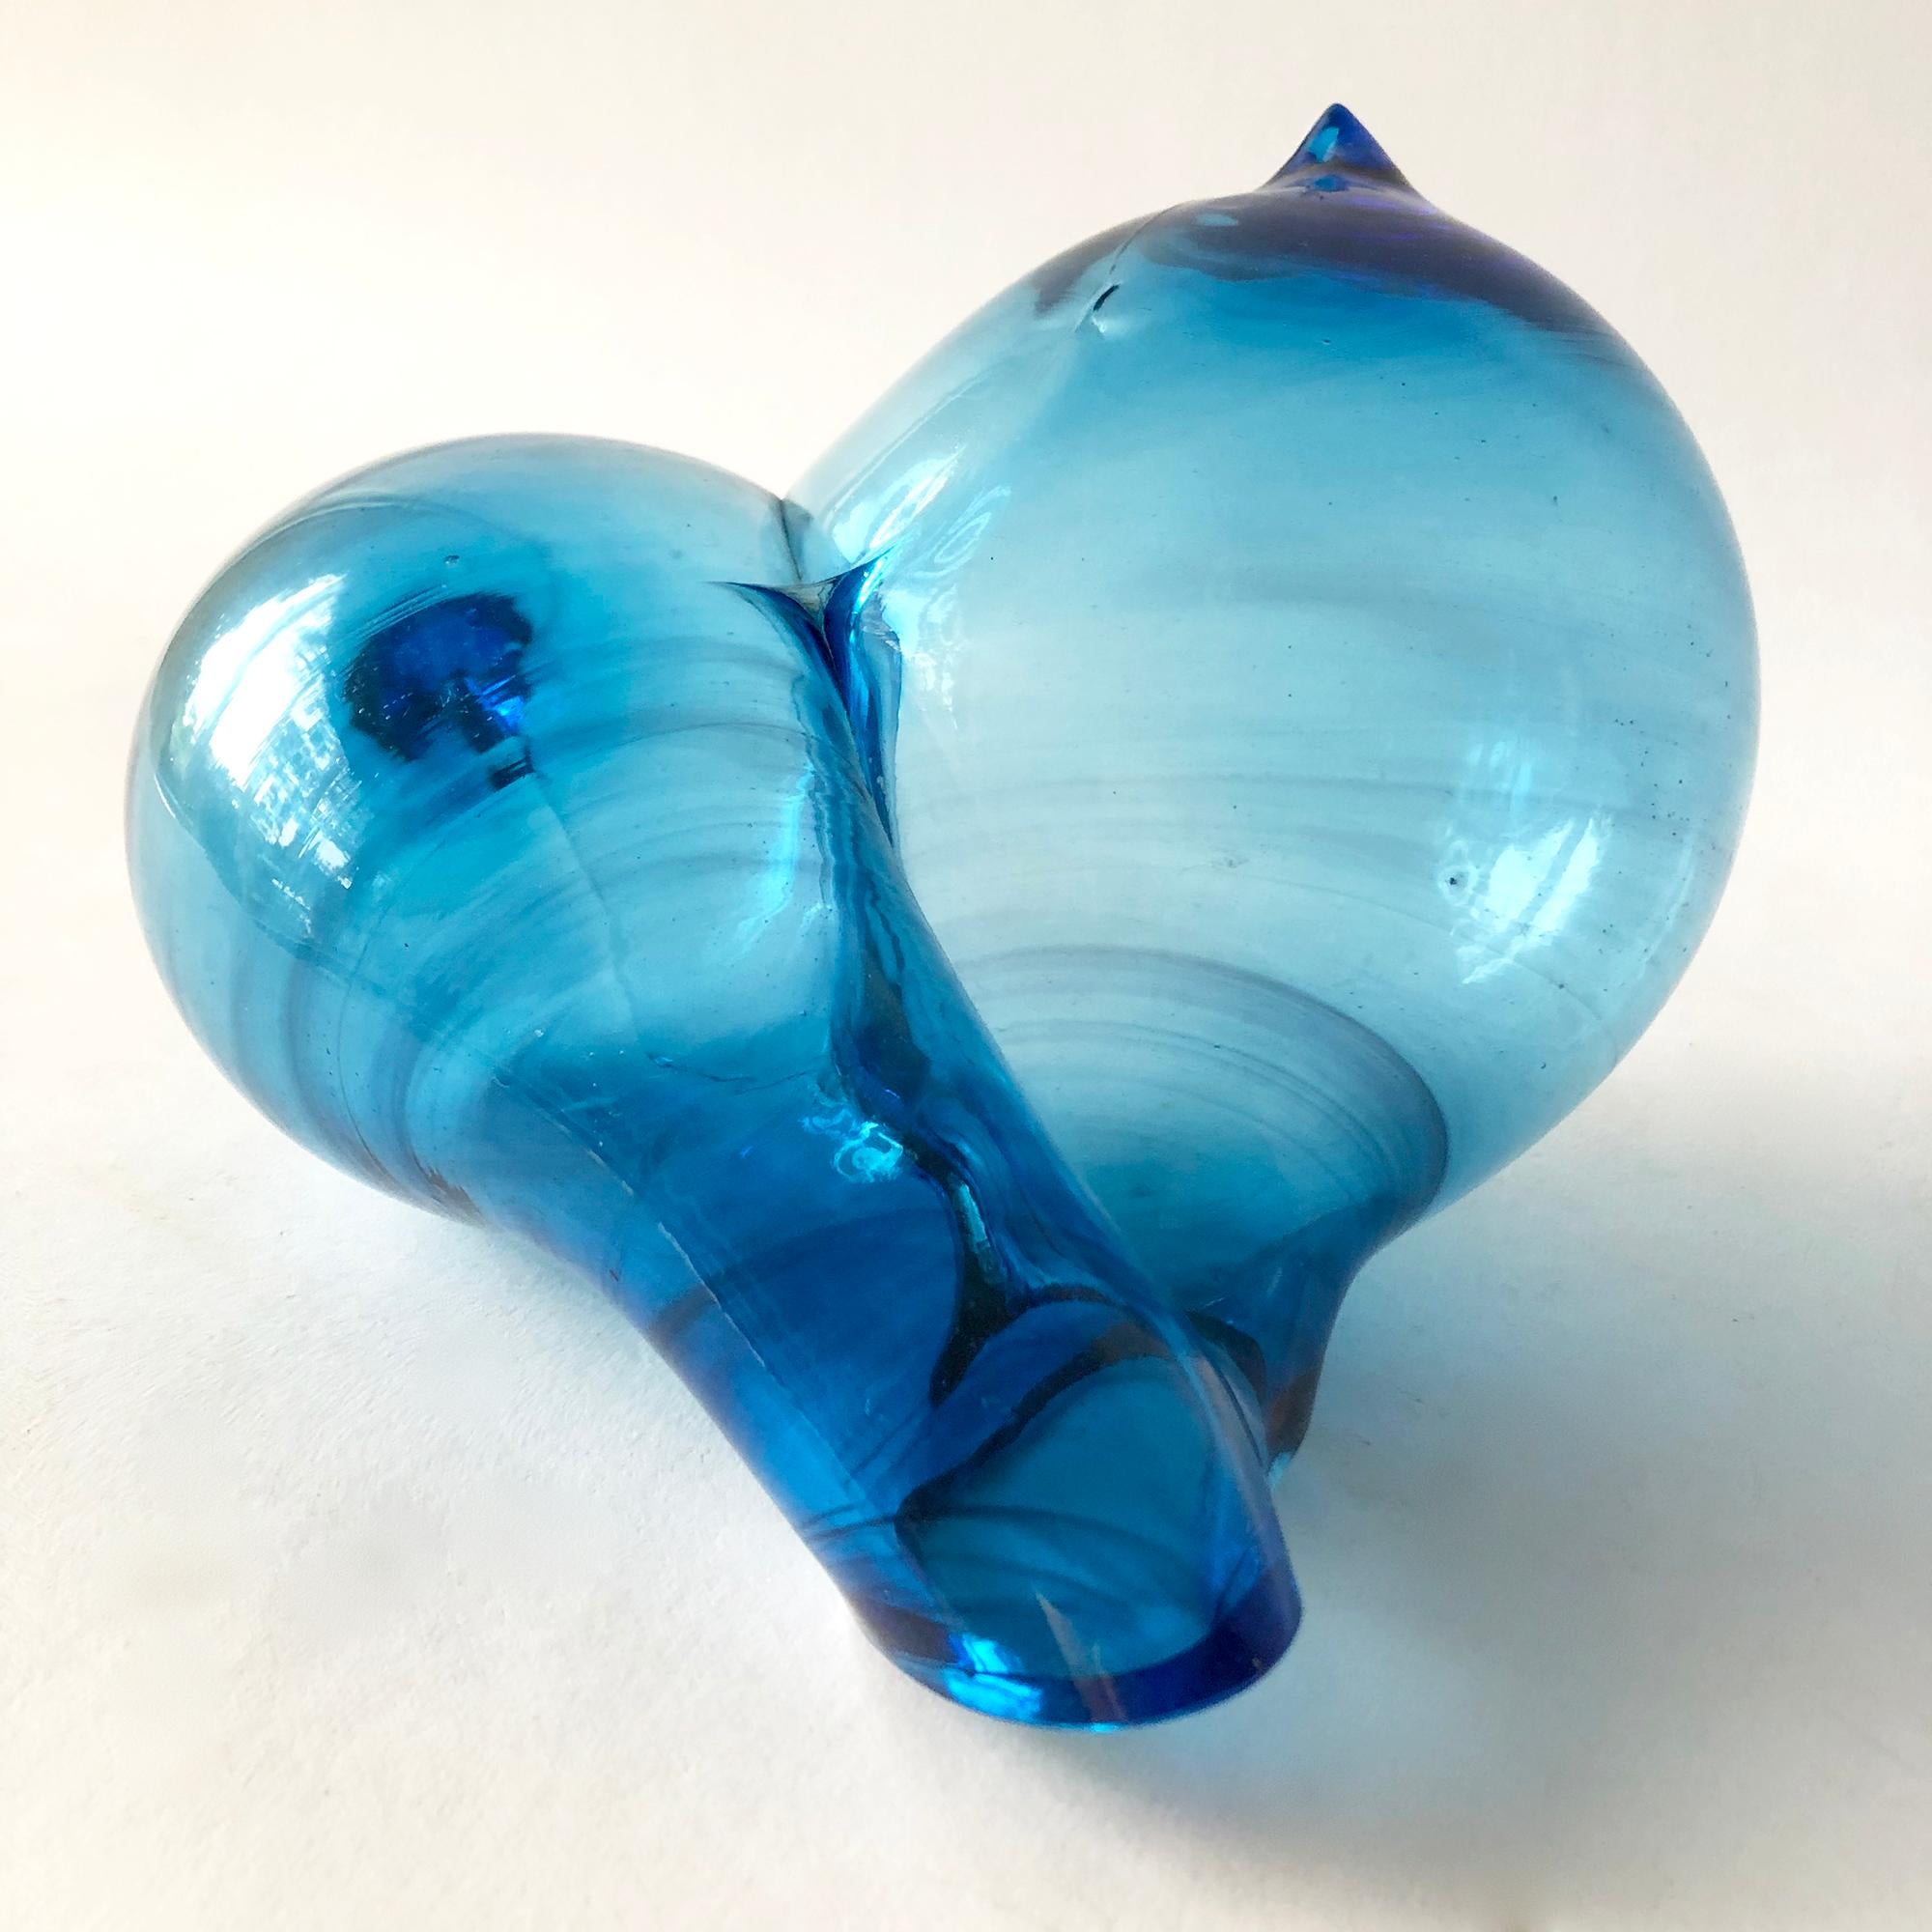 1976 Gary Beecham American Studio Blown Glass Sculpture In Good Condition For Sale In Palm Springs, CA